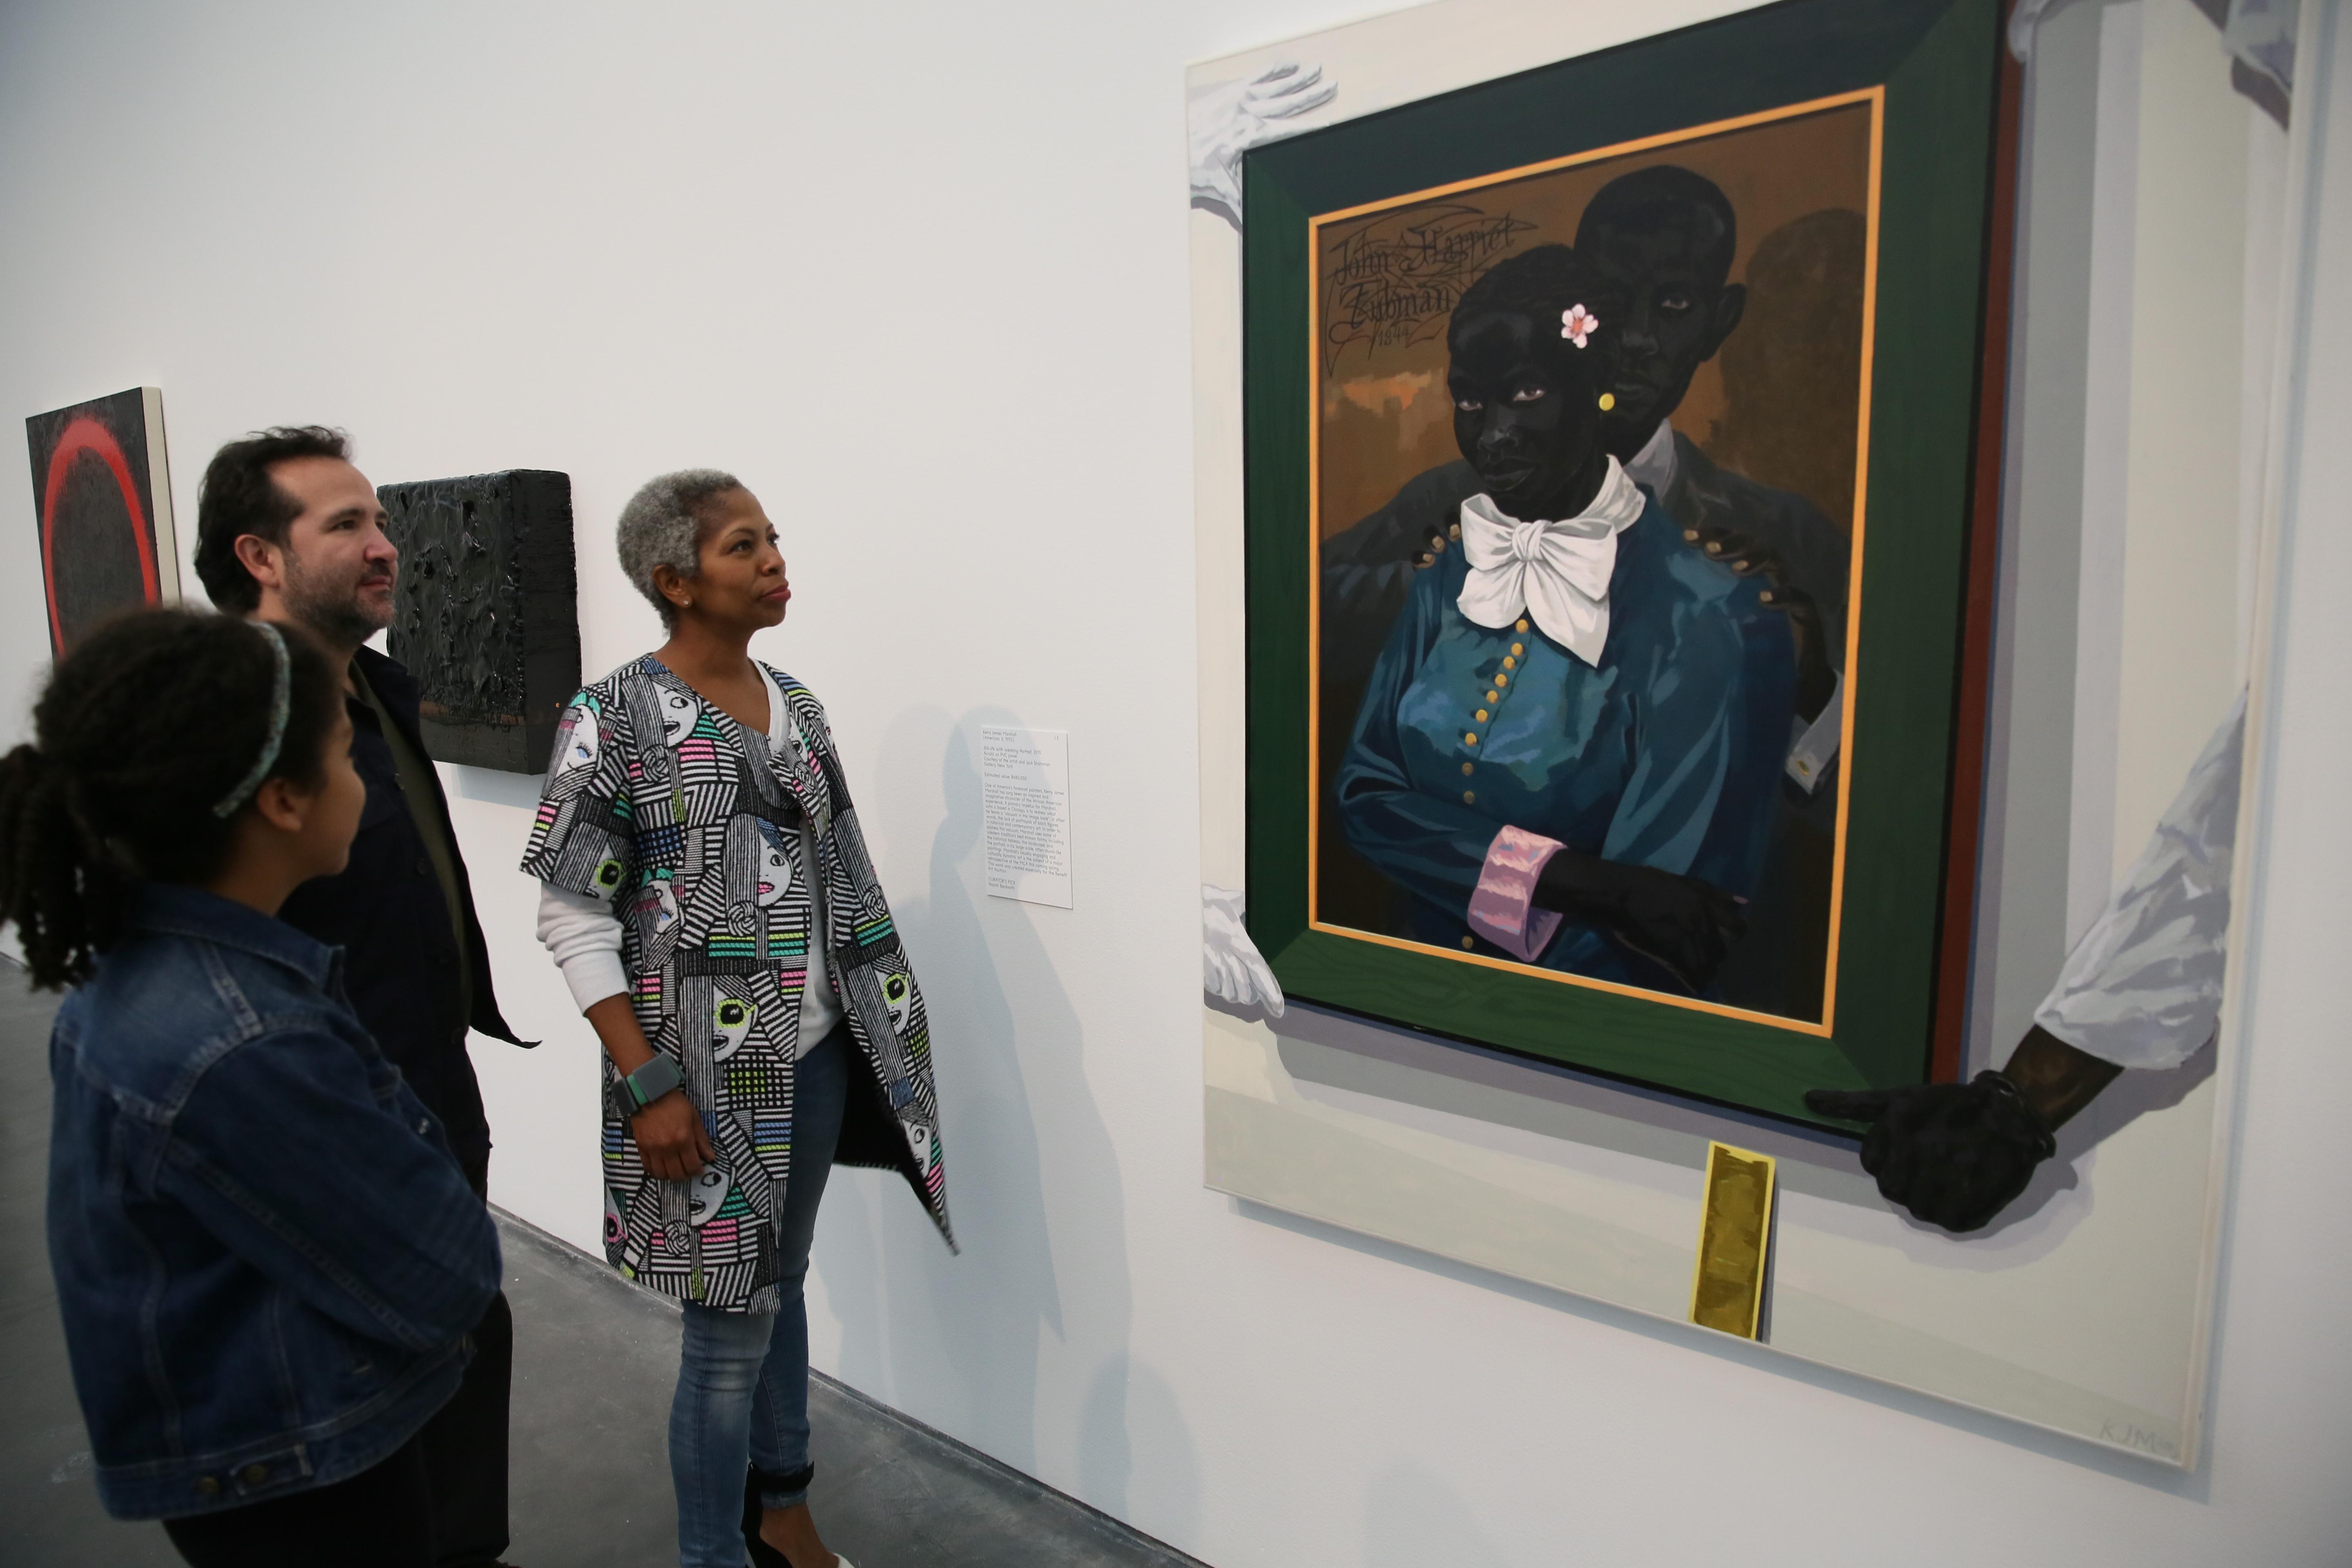 Three visitors look at a large painting, which depicts a painting of Harriet Tubman and her husband. The painting shows the portrait being held in place by men wearing gloves with a yellow level propped against the wall below.